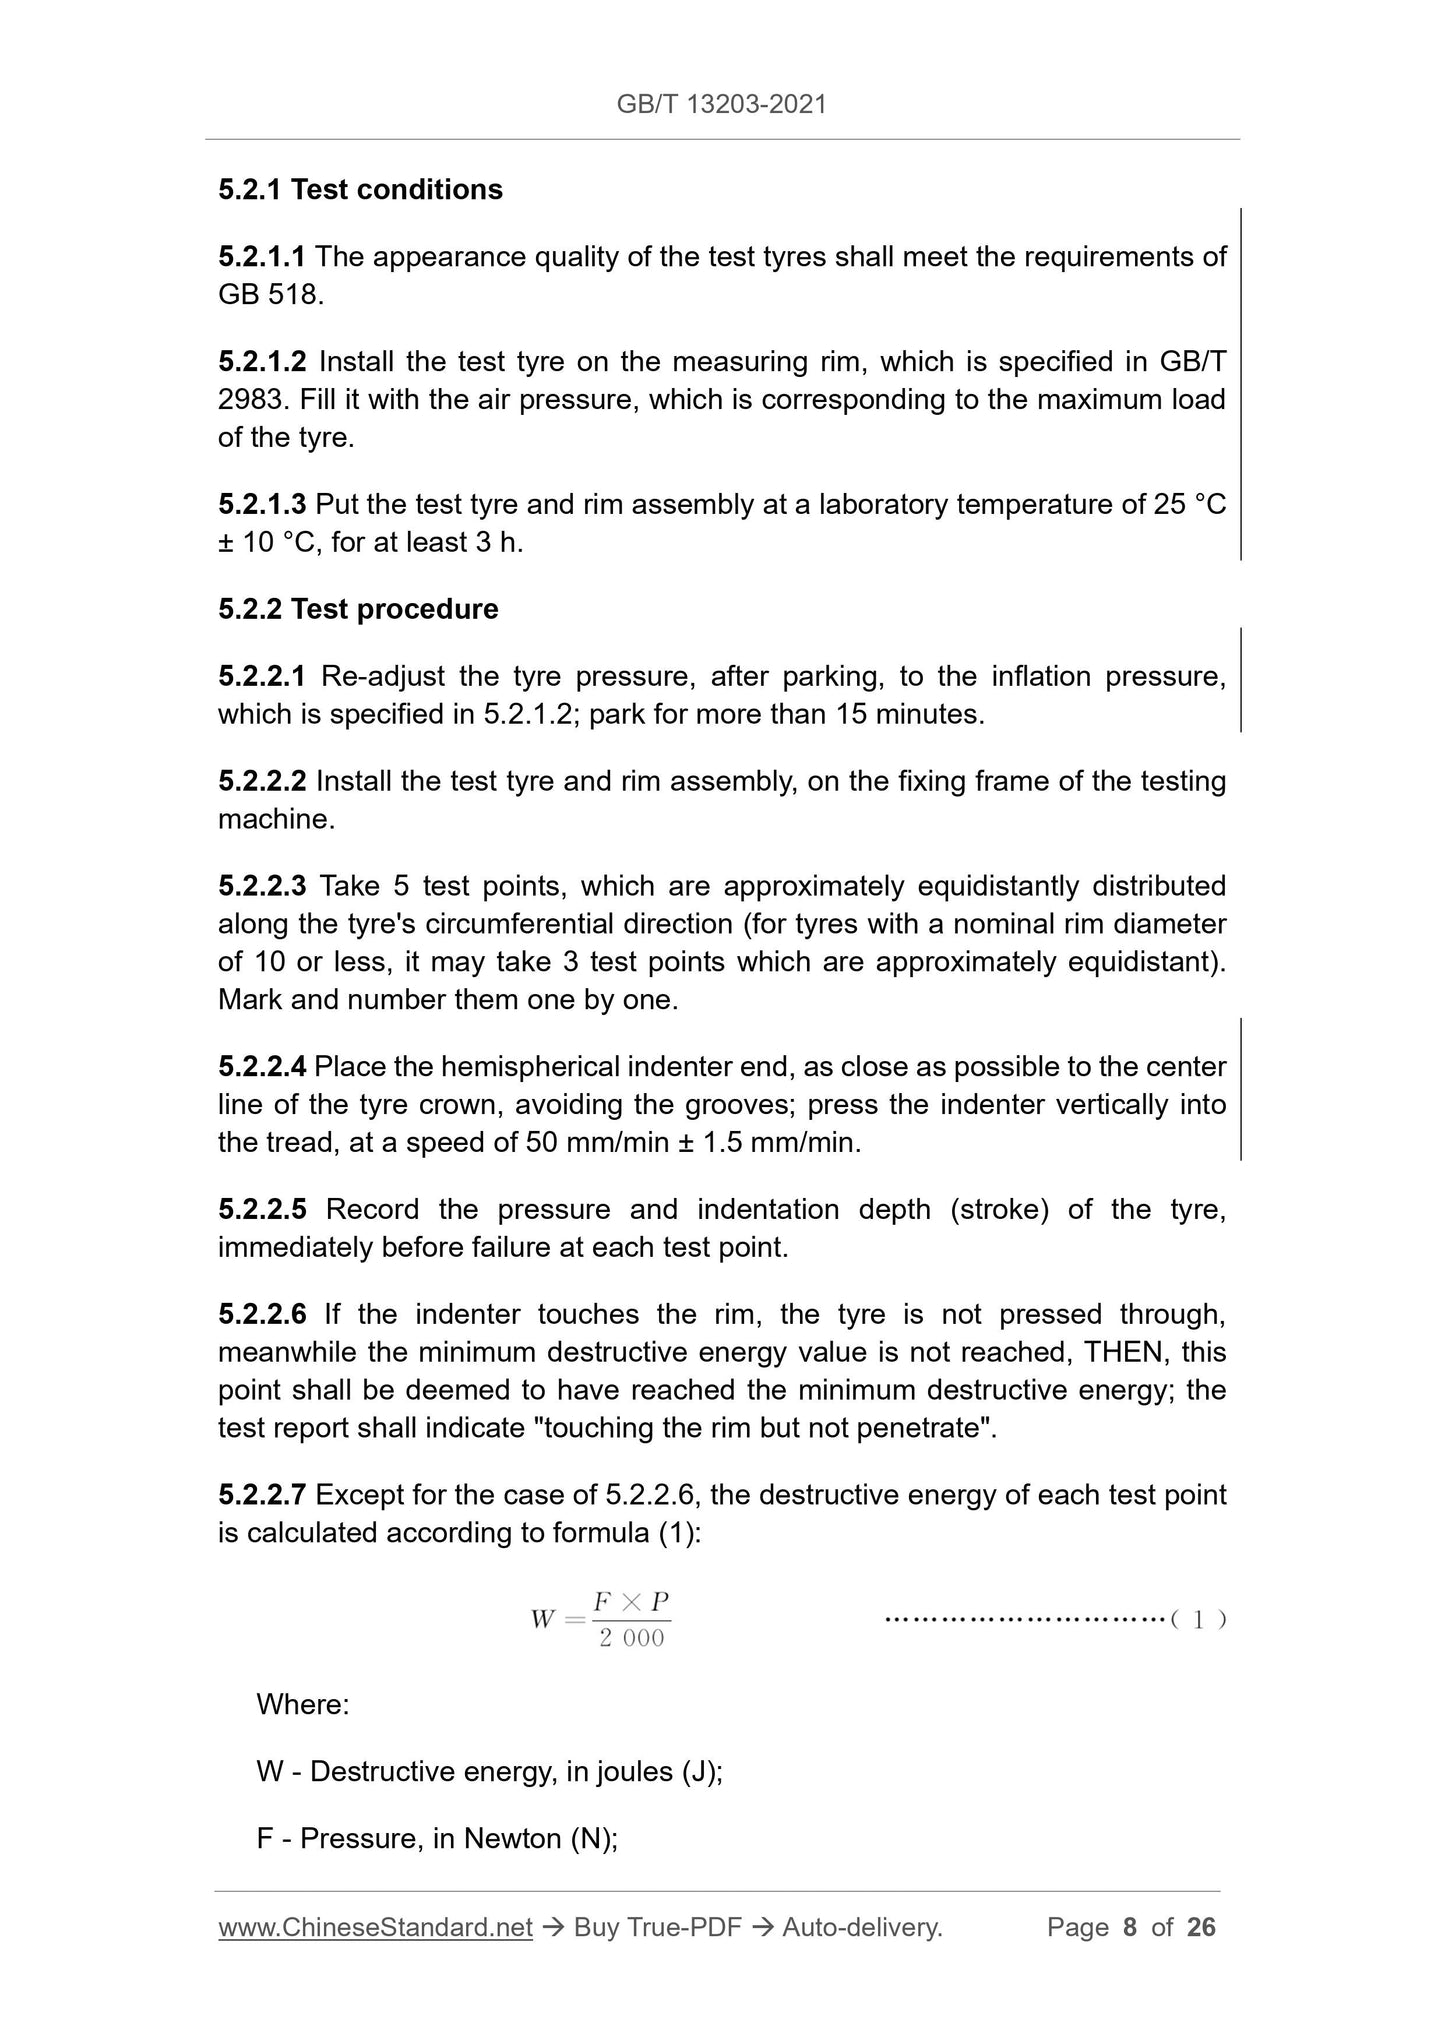 GB/T 13203-2021 Page 6